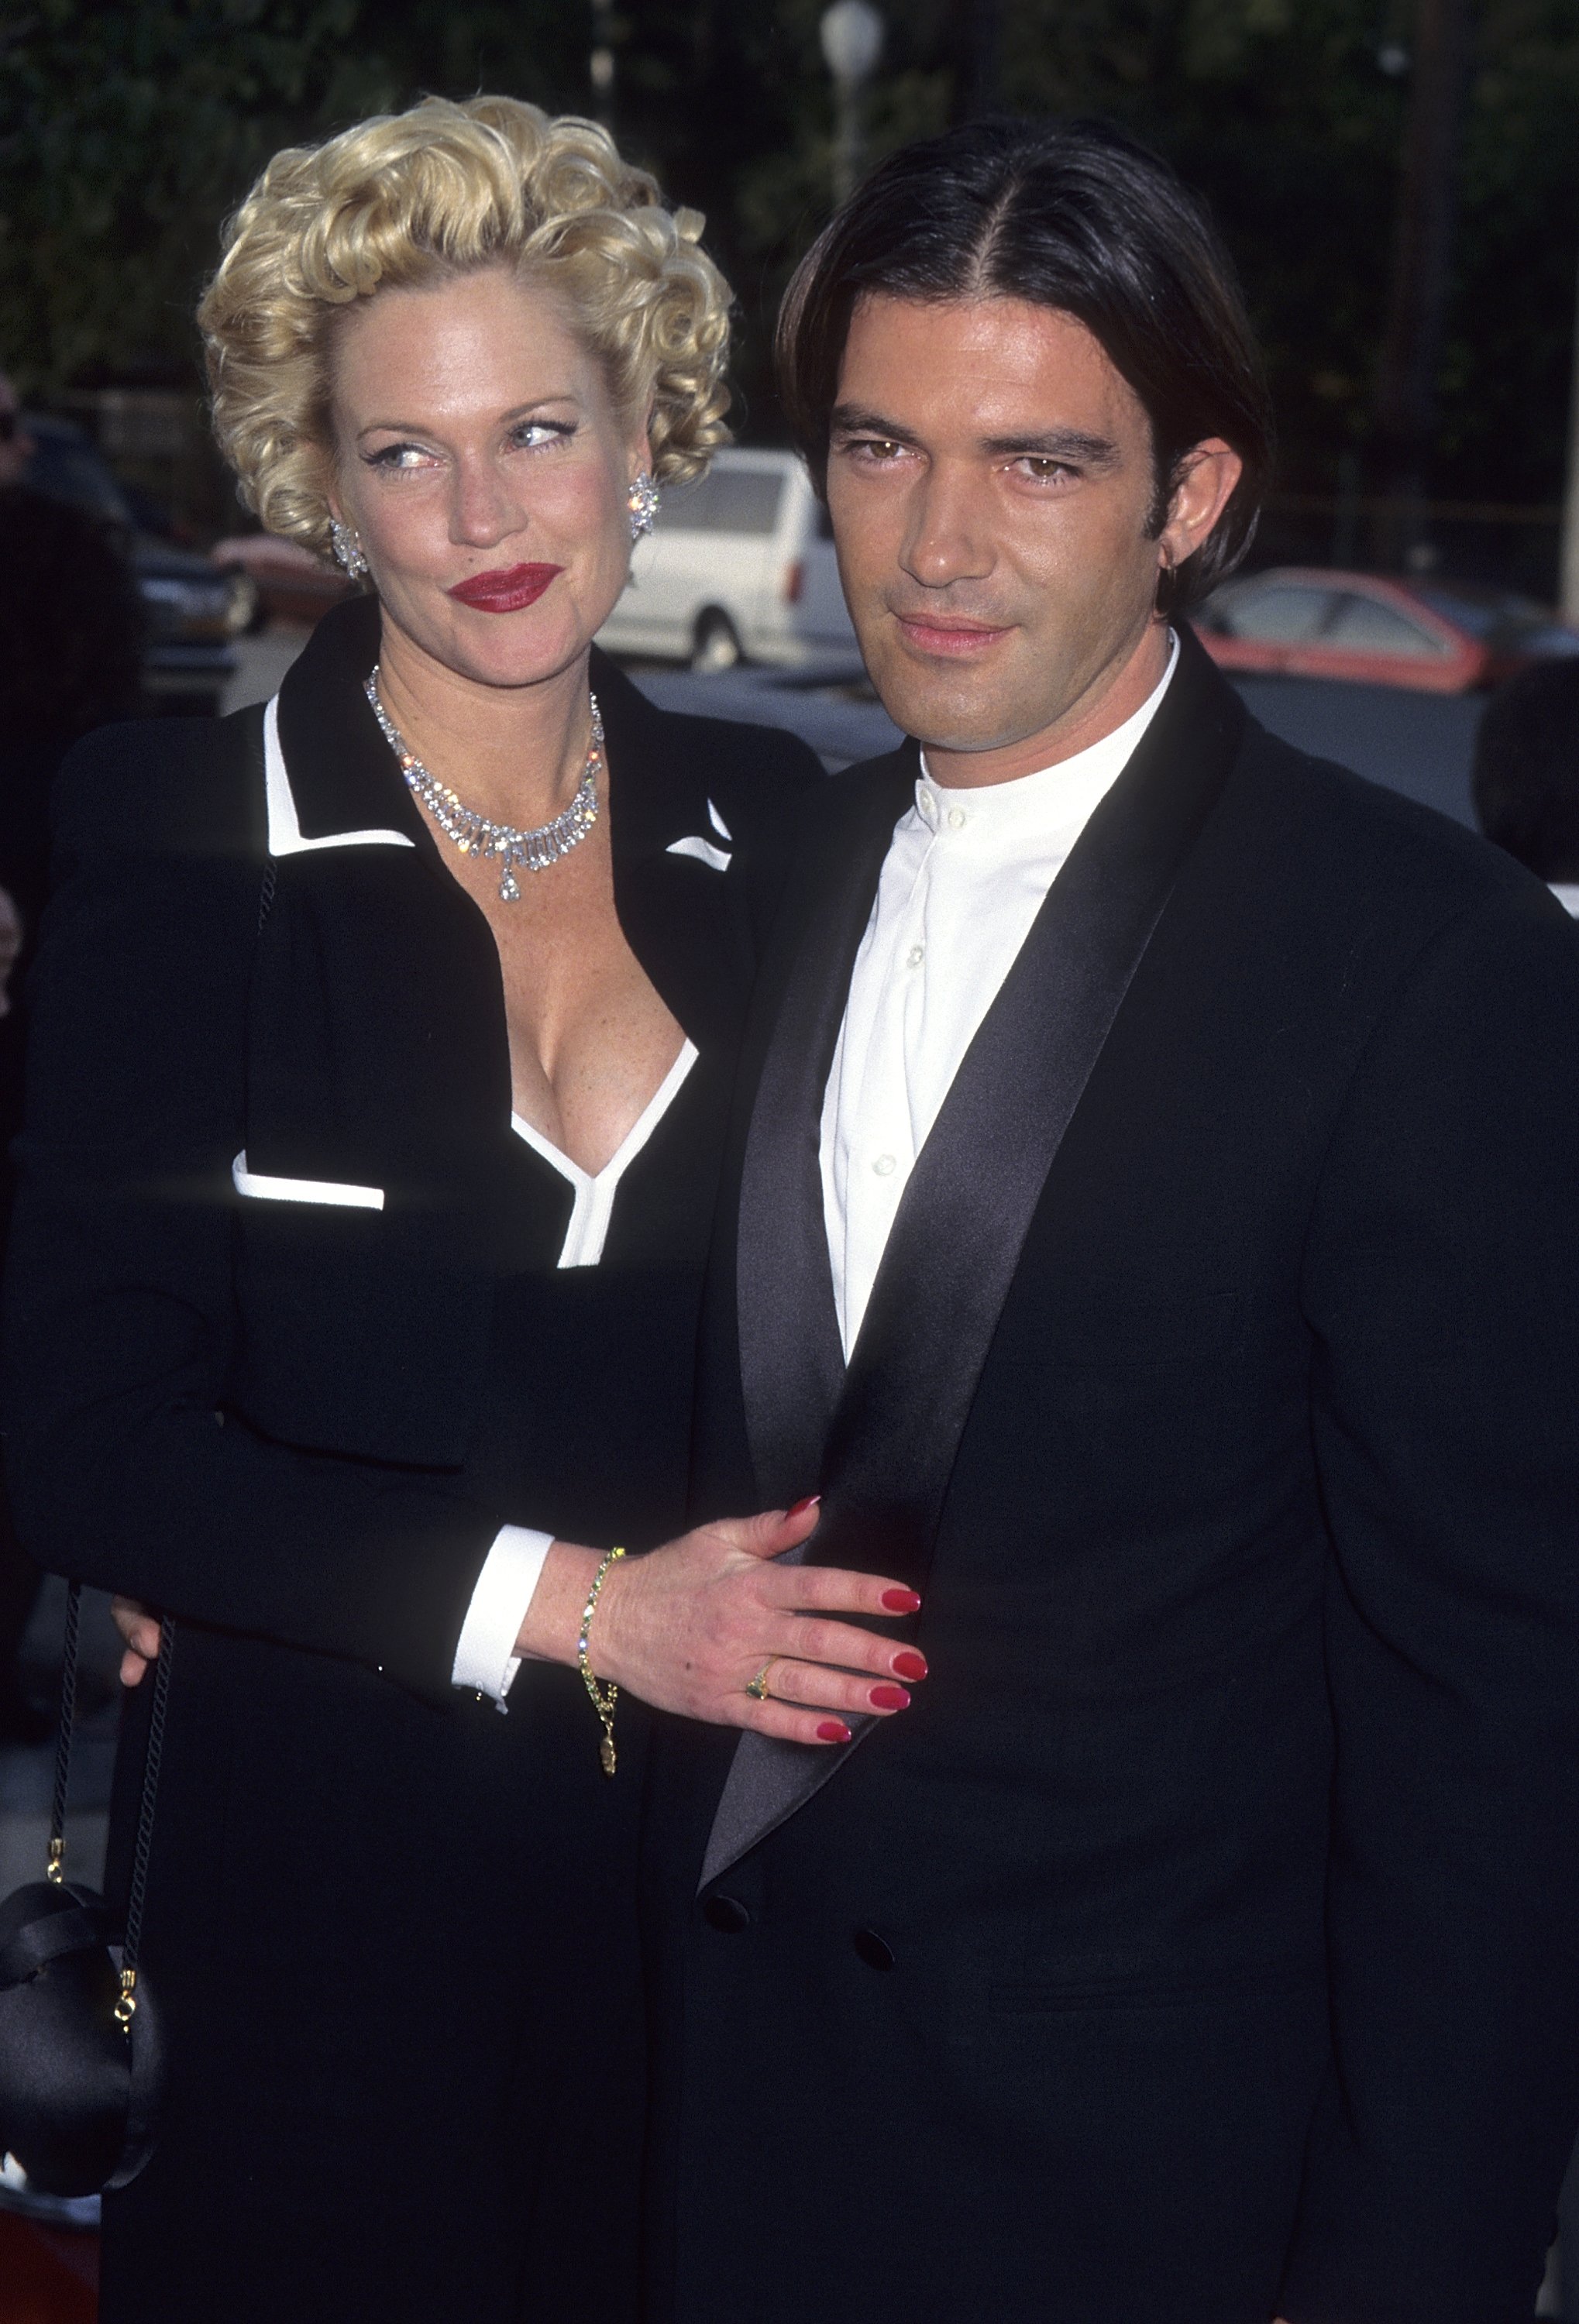 Melanie Griffith and actor Antion Banderas attend the First Annual Blockbuster Entertainment Awards on June 3, 1995 | Photo: Getty Images